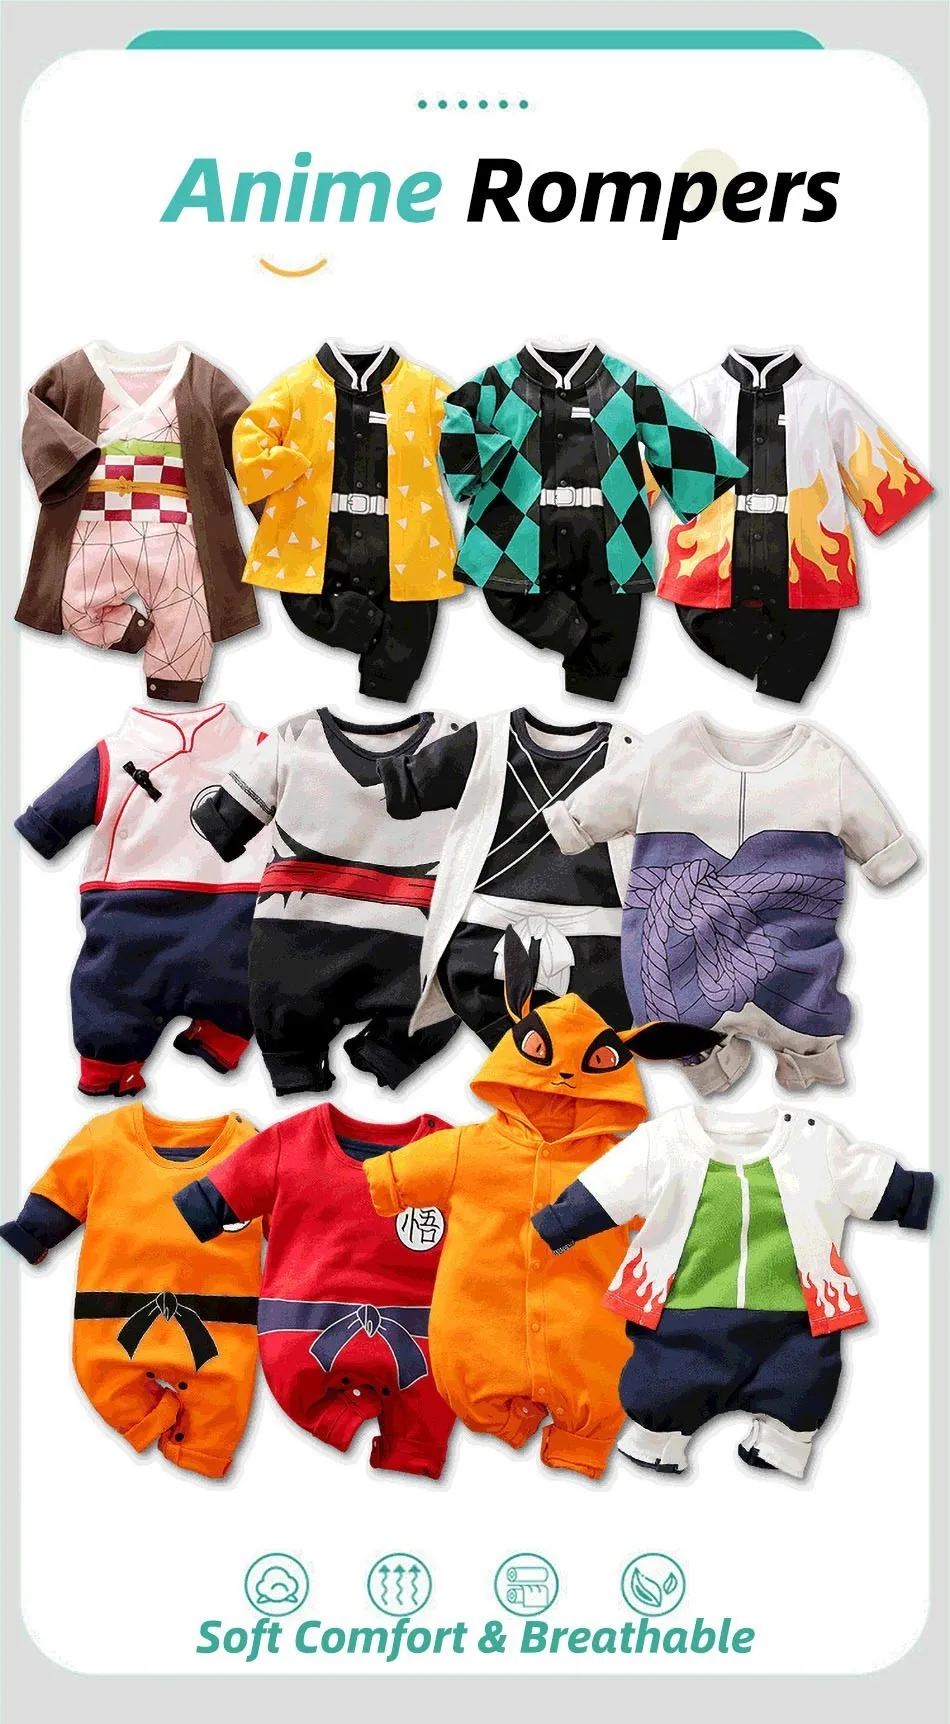 Anime Baby Rompers Newborn Cosplay Costume Infant Akatsuki Frieza Vegeta Luffy Tanjirou Cotton Clothes Boys Girls Kids Outfit Baby Bodysuits made from viscose 